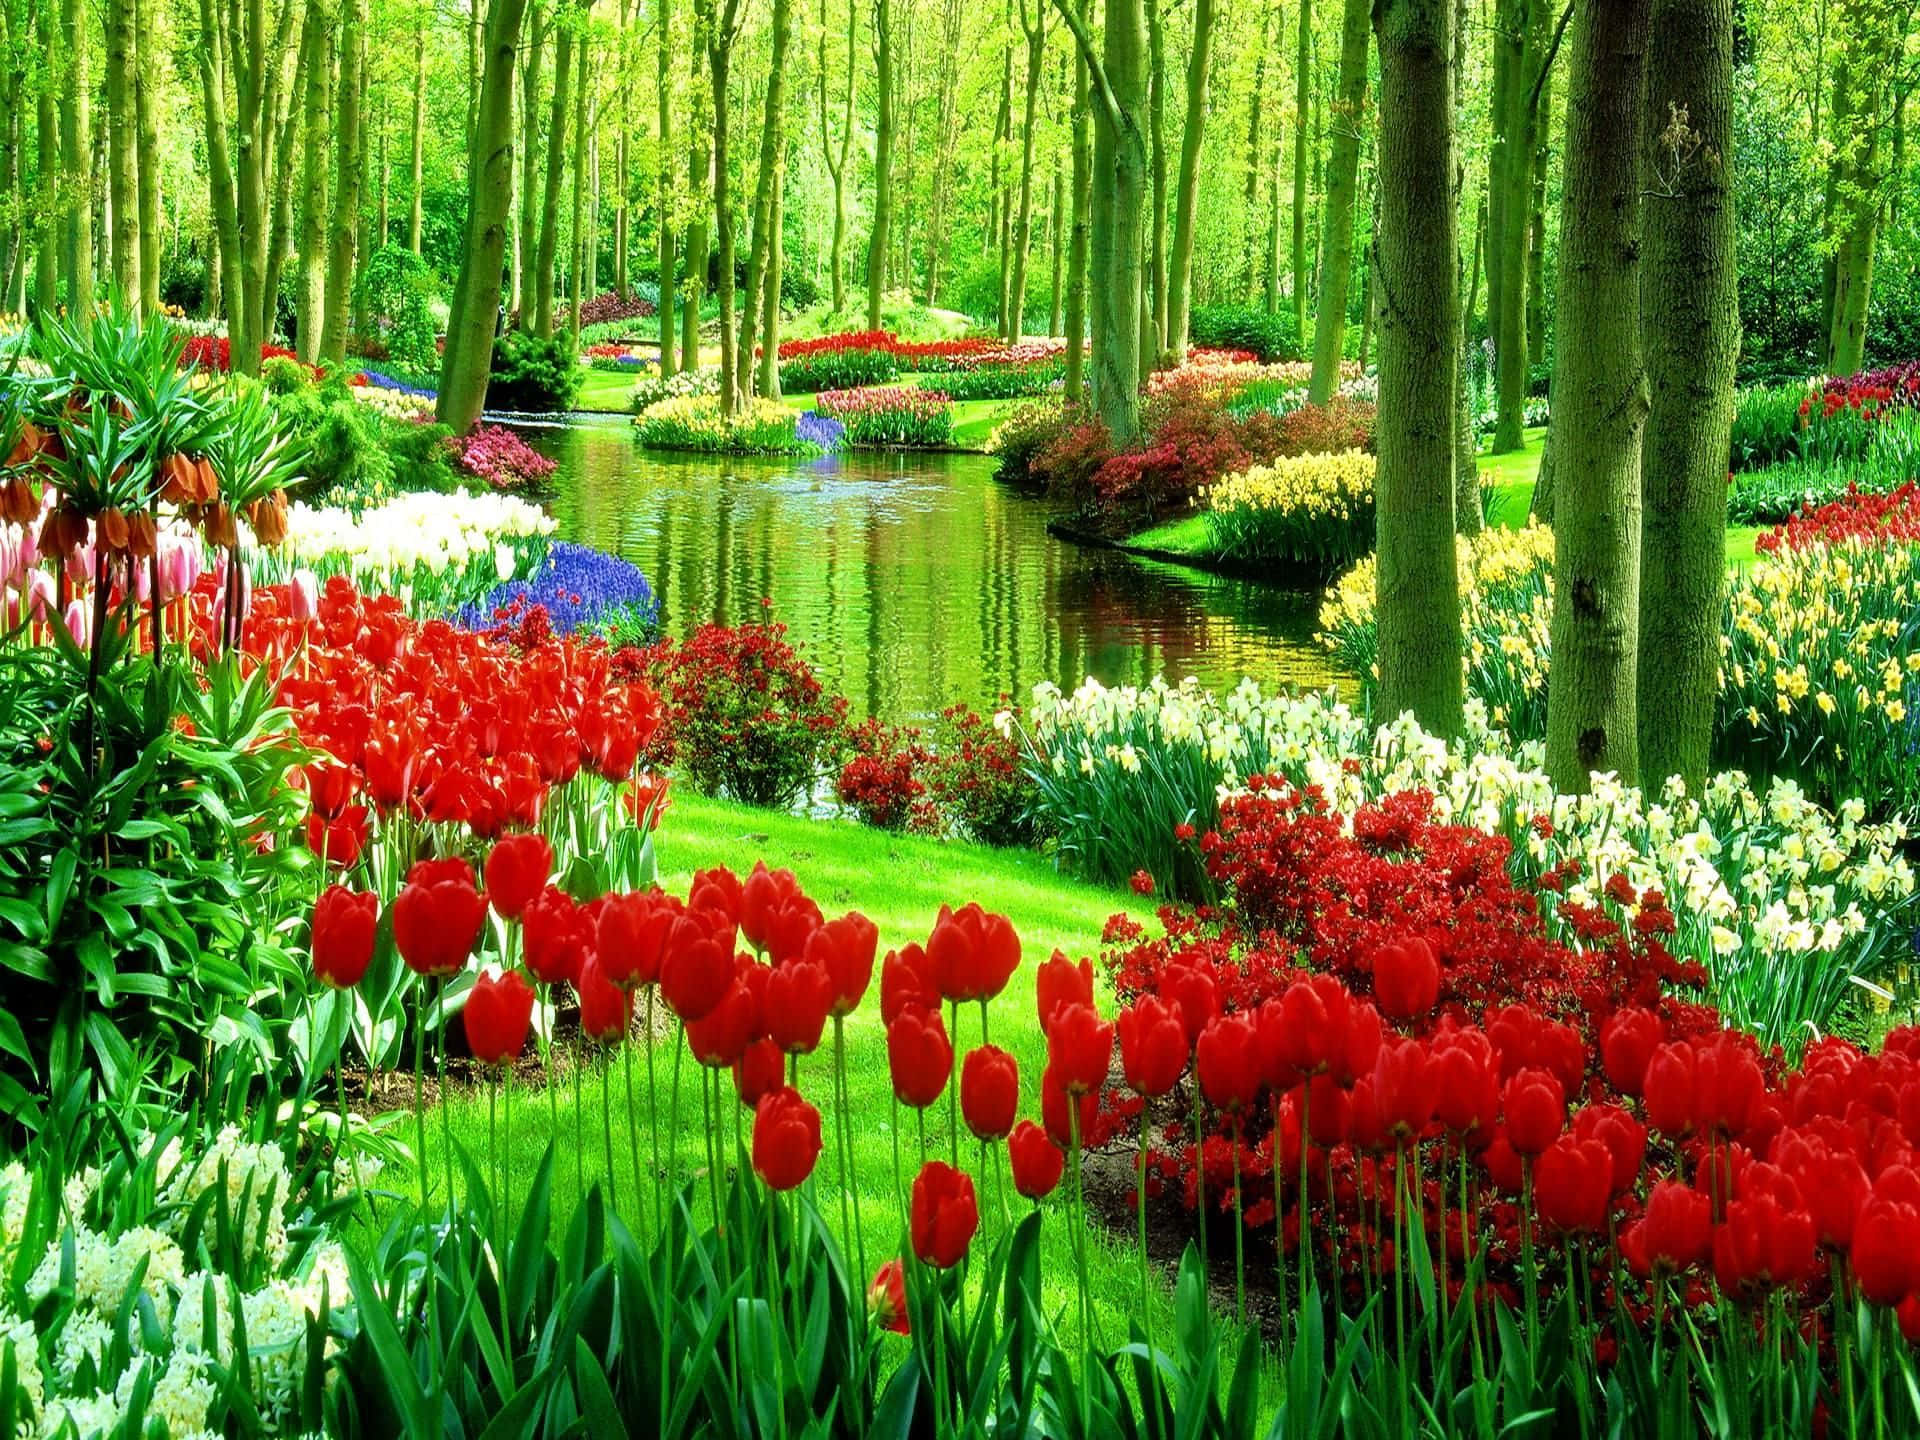 A Beautiful Garden With Red Tulips And Trees